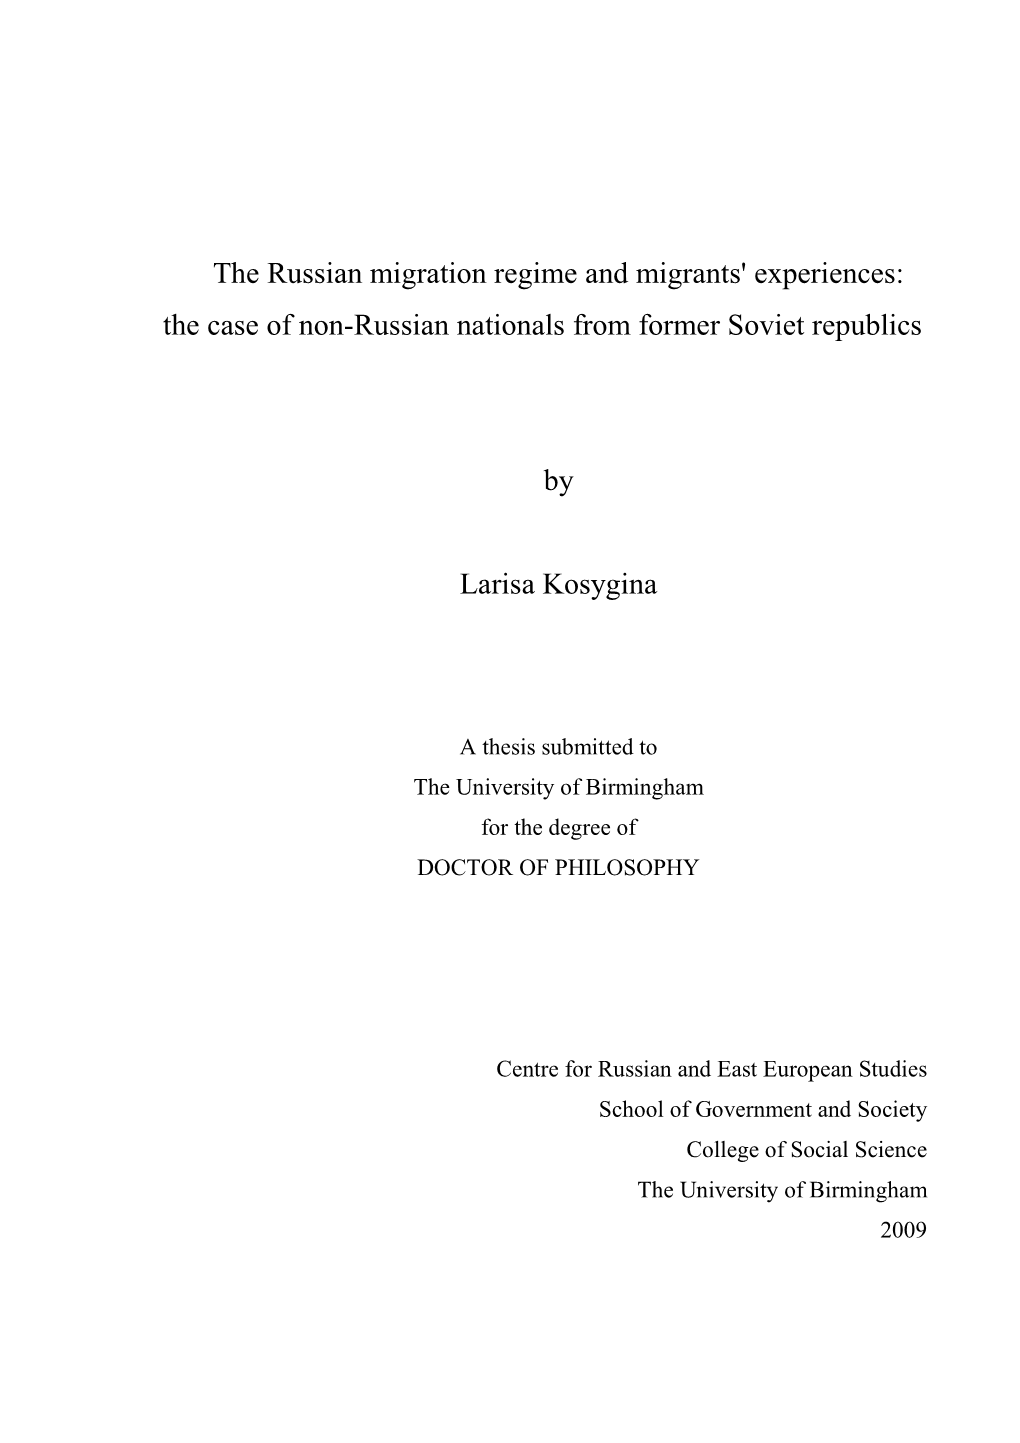 The Russian Migration Regime and Migrants' Experiences: the Case of Non-Russian Nationals from Former Soviet Republics